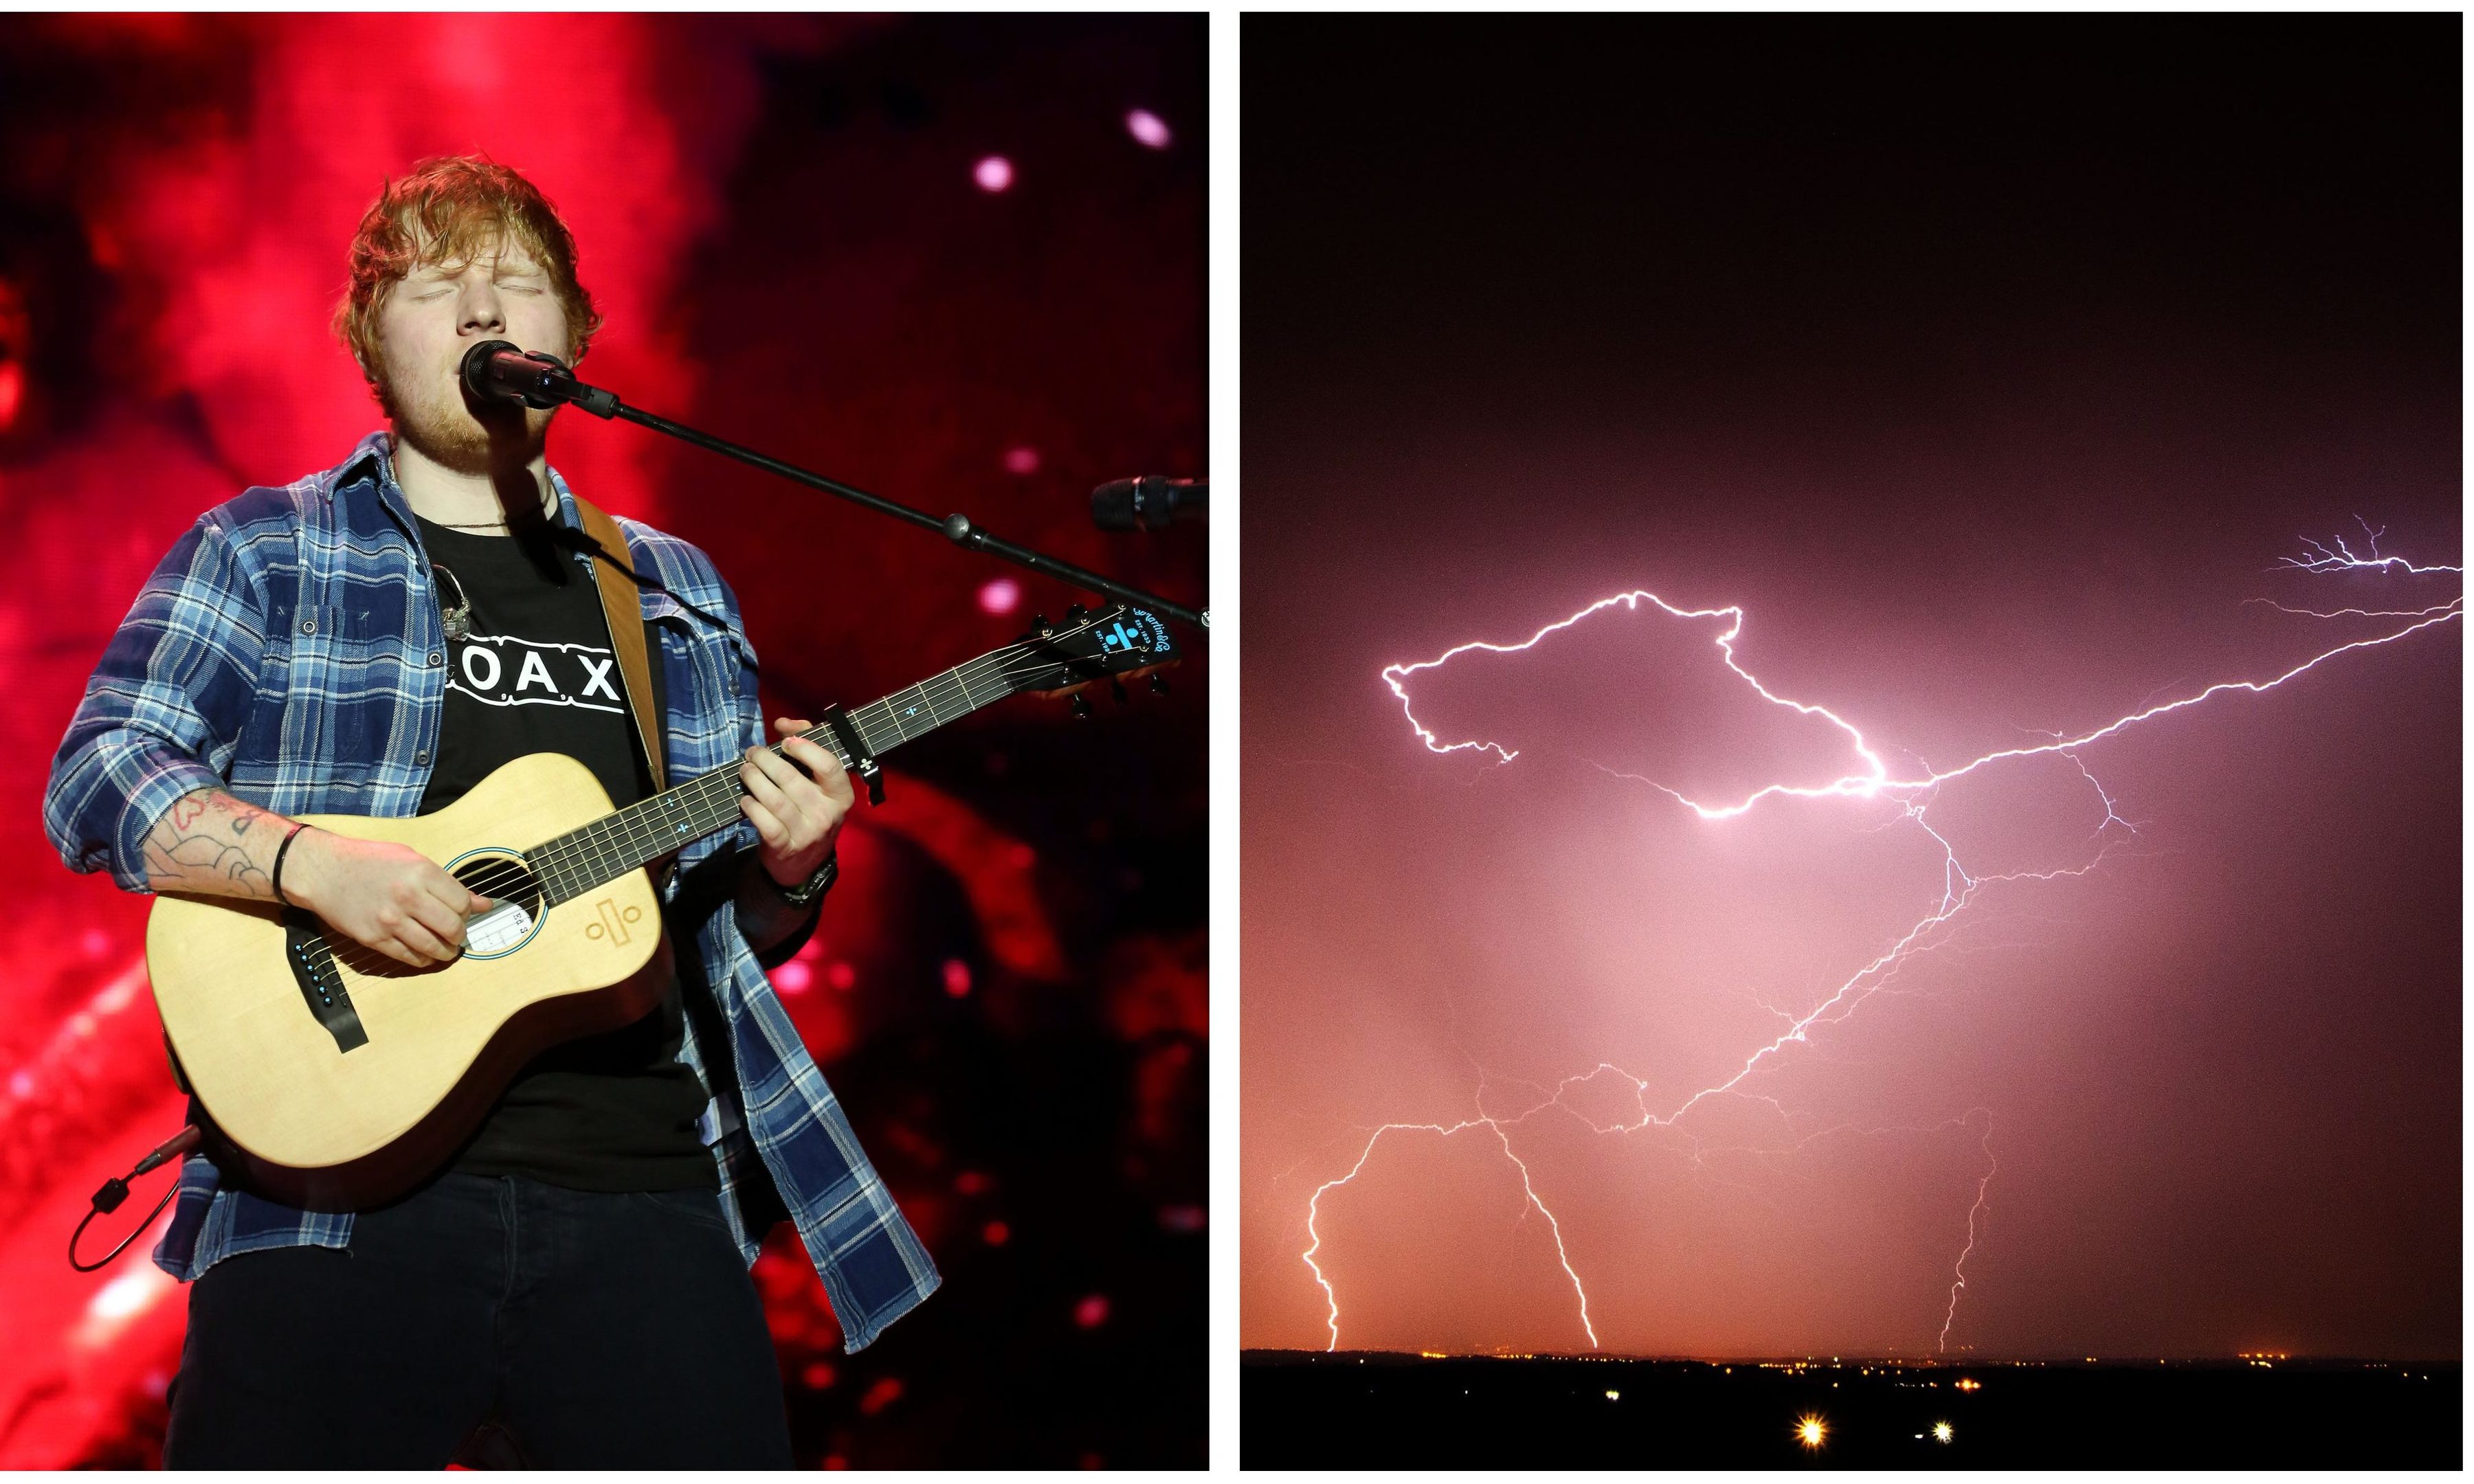 Thunderstorms could affect Ed Sheeran's shows in Glasgow this weekend